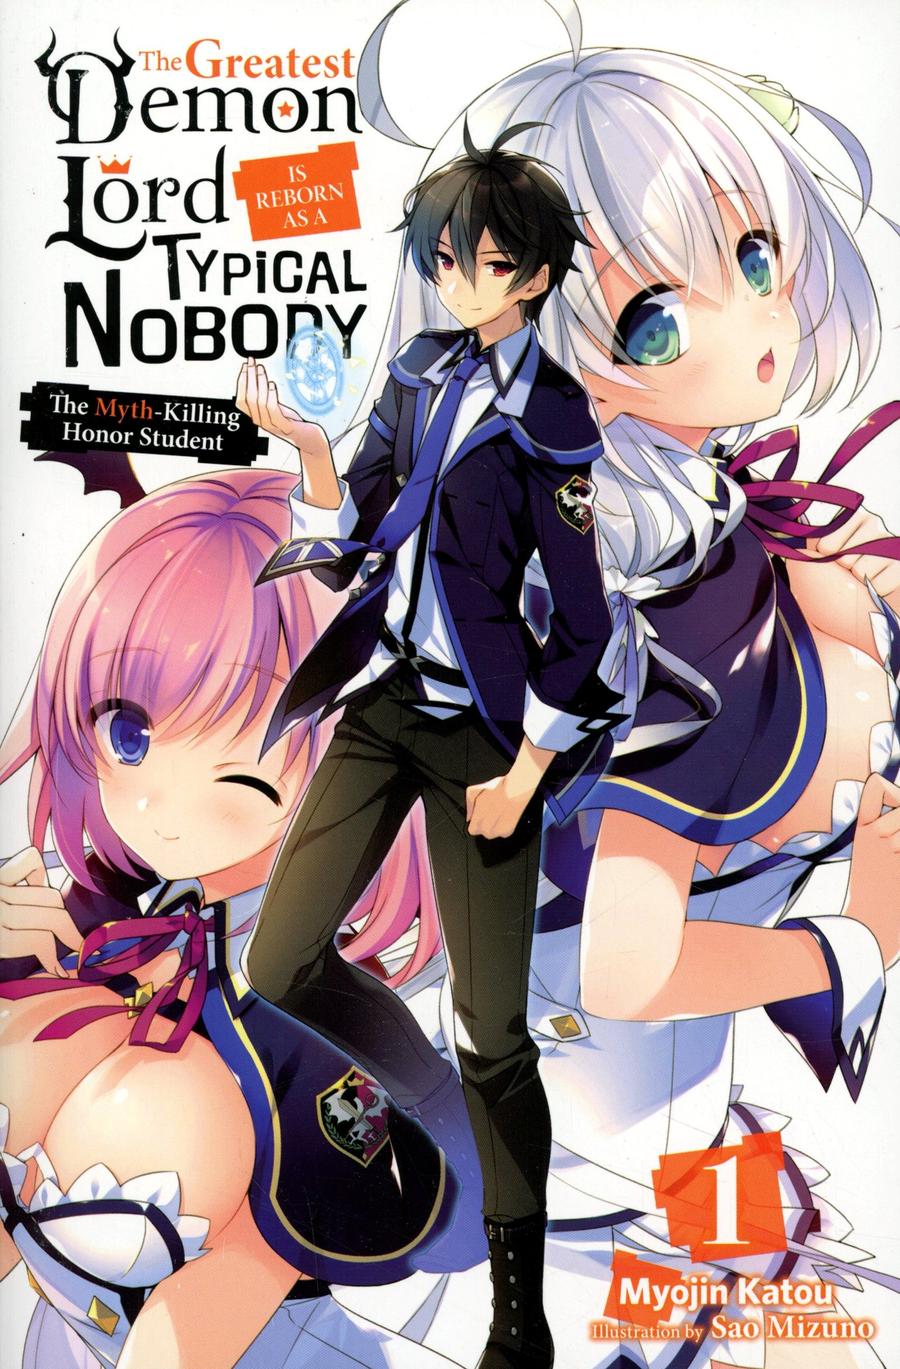 Greatest Demon Lord Is Reborn As A Typical Nobody Light Novel Vol 1 The Myth-Killing Honor Student TP